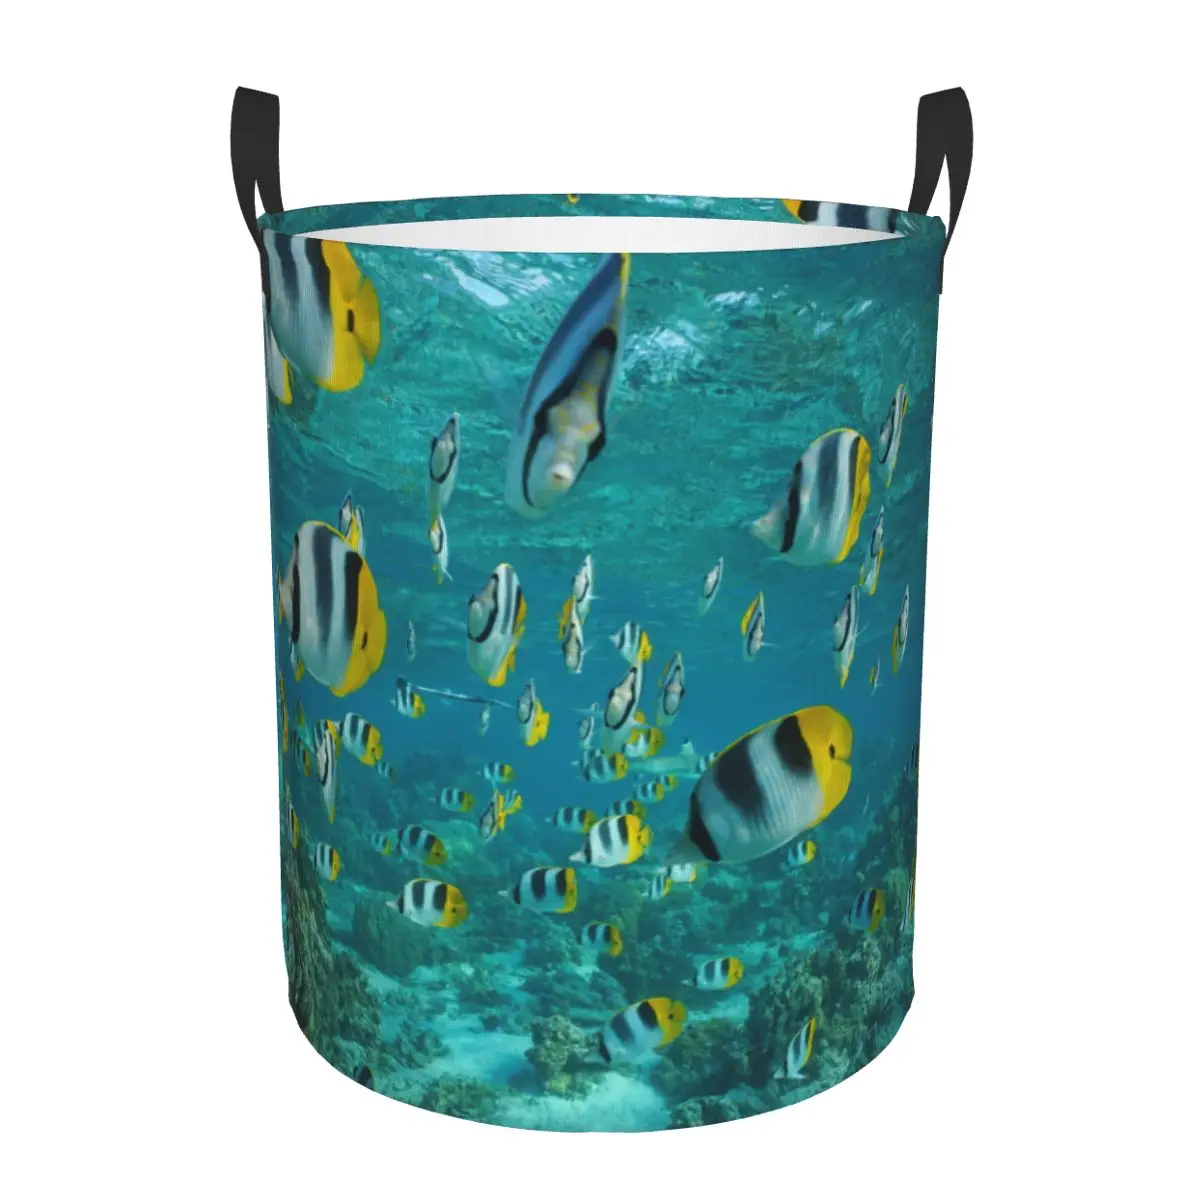 

Foldable Laundry Basket for Dirty Clothes Tropical Fish Pacific Butterflyfish In Water Storage Hamper Kids Baby Home Organizer